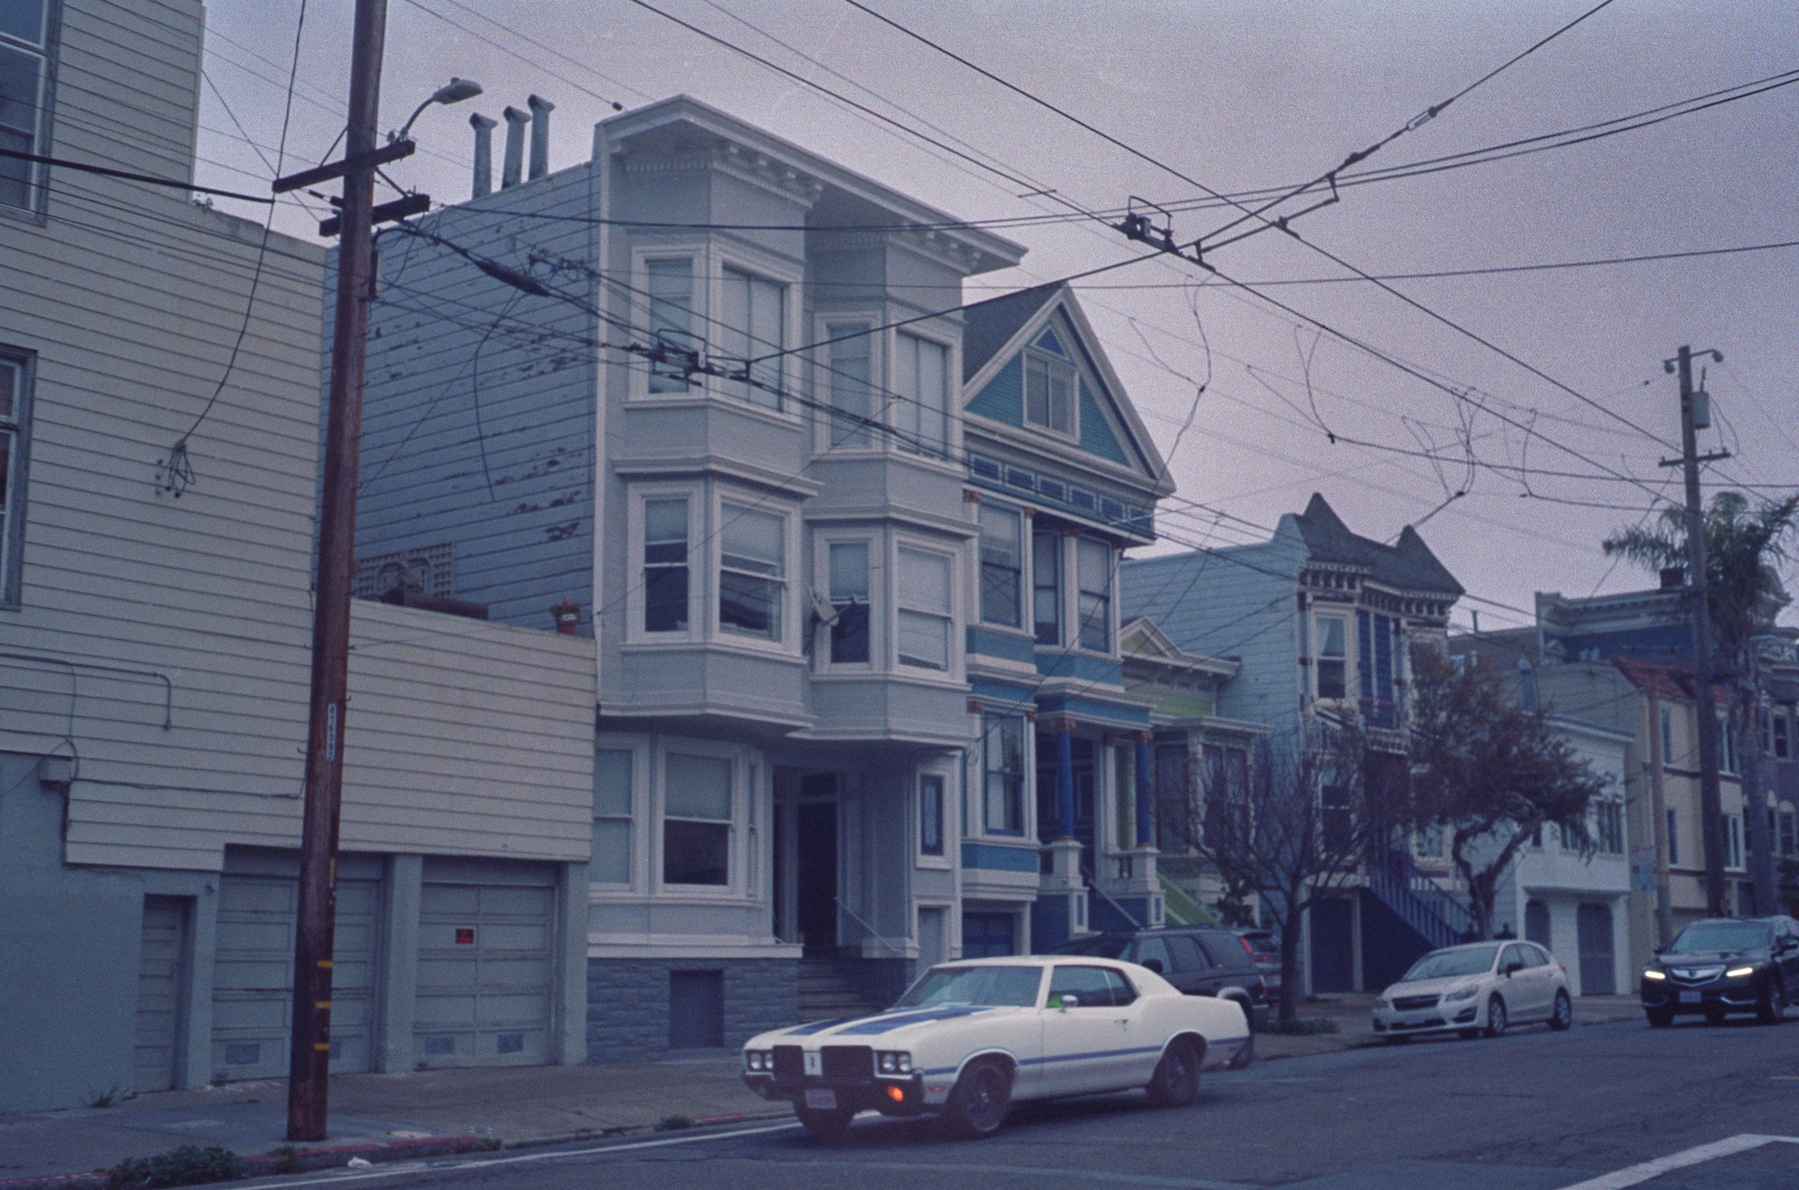 a scan of a color photograph of a neighborhood in Cole Valley San Francisco where the Victorian houses are mostly blue and there is a retro white car parked on the street